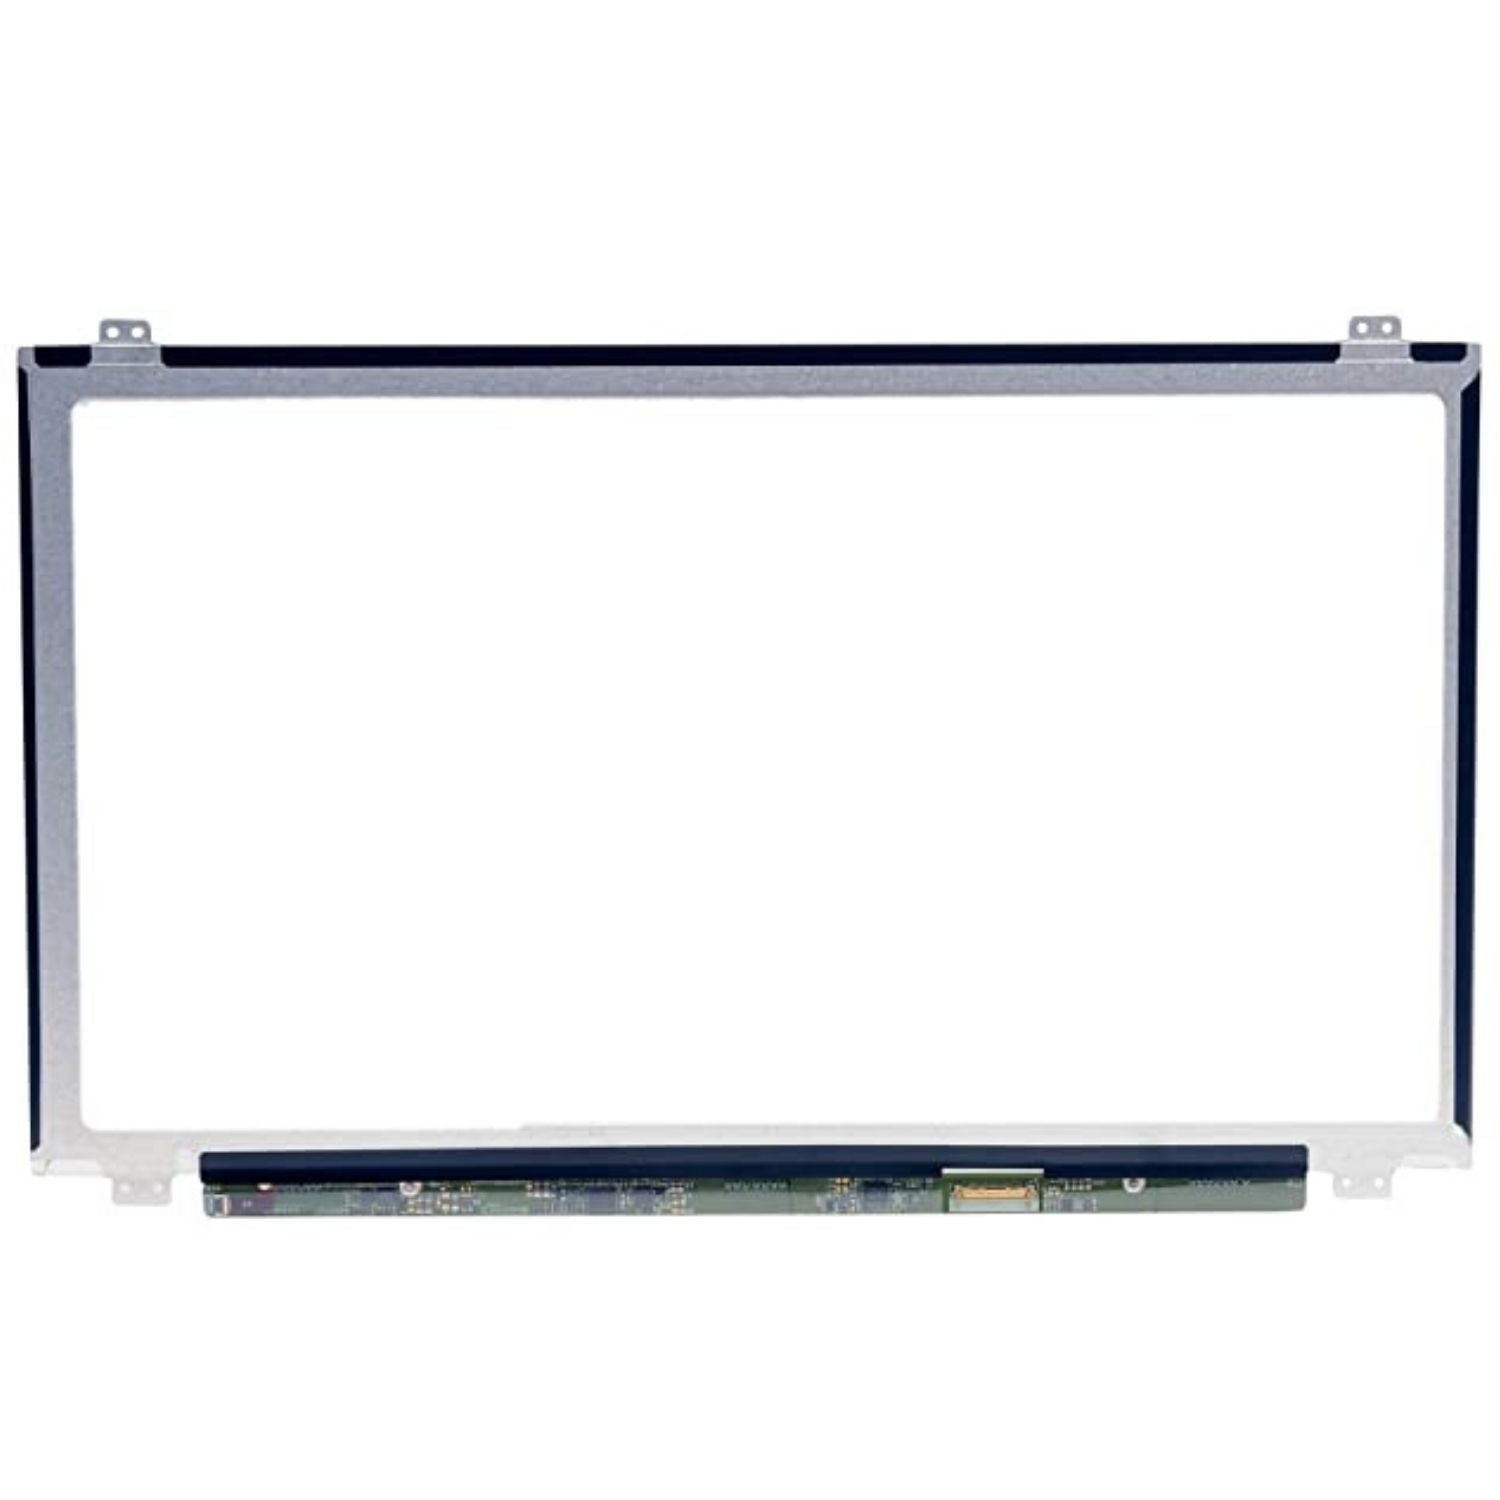 Laptop Replacement Screen 15.6" eDp Slim LED 30 PIN for Dell INSPIRON 15 3000 Series laptop's.